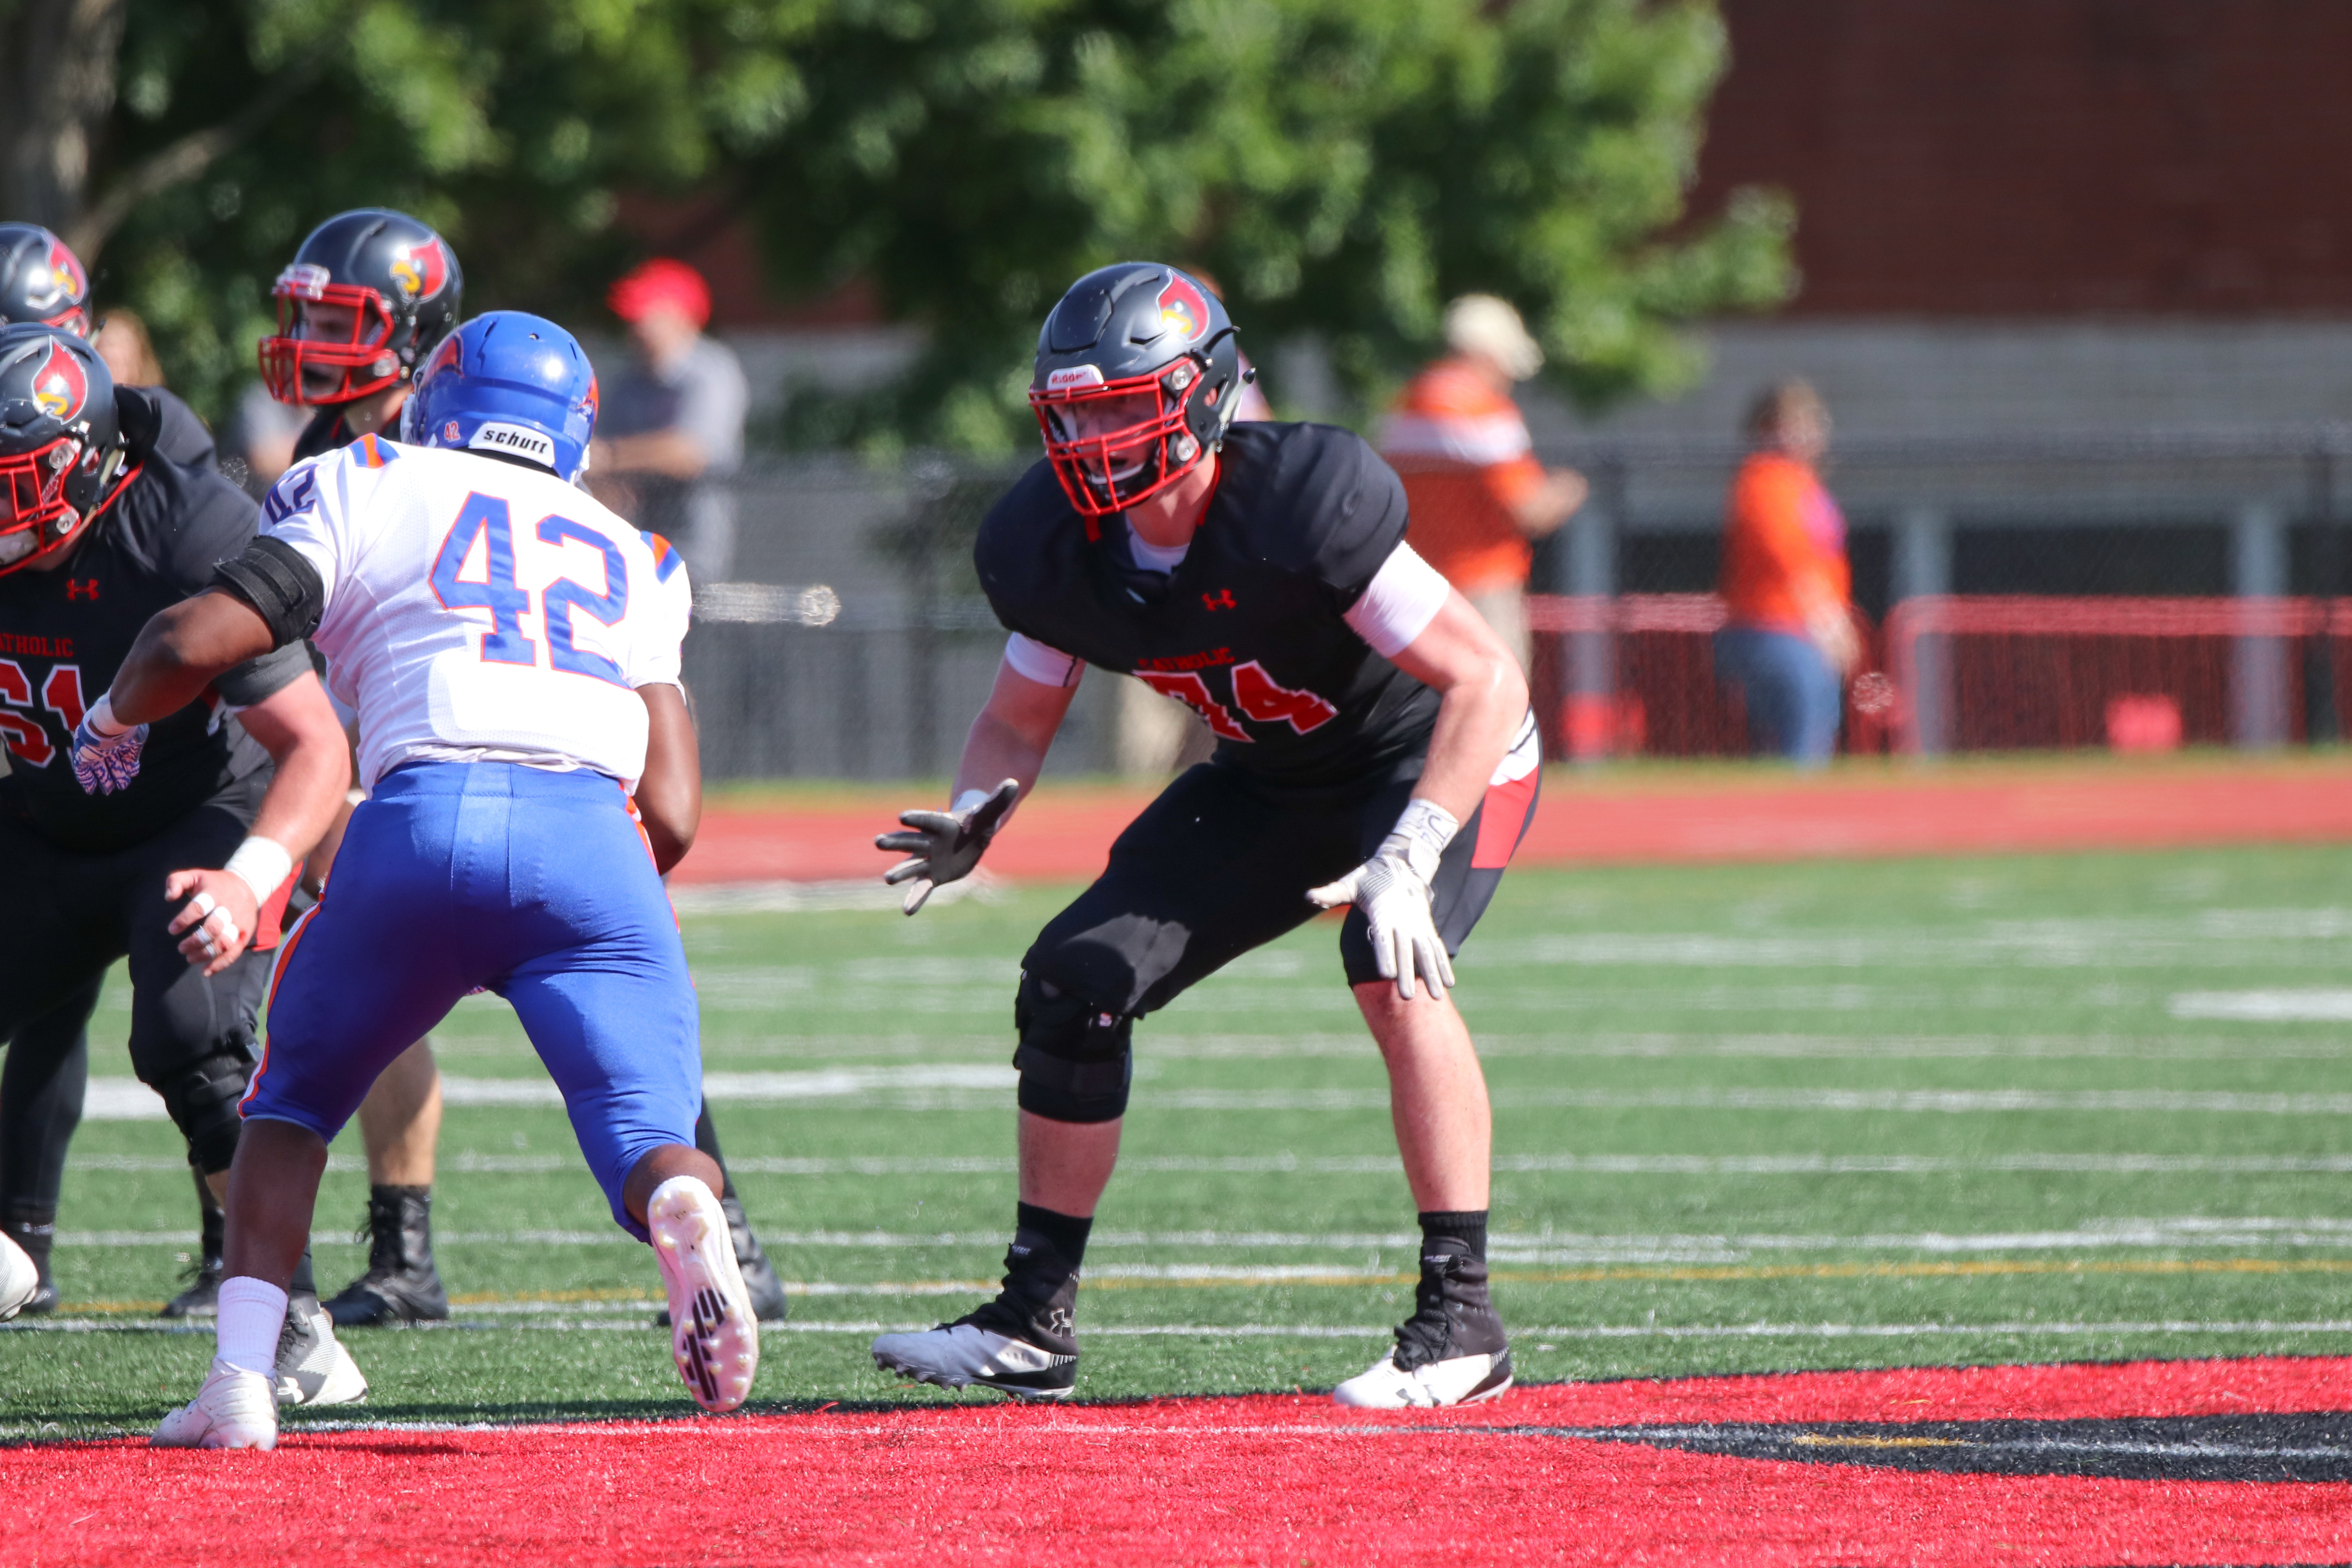 Catholic University of America offensive lineman Mike Zimmerman sets back in a pass block against an opposing defensive end. (Photo courtesy of Joey Gardner/ FotoJoe)